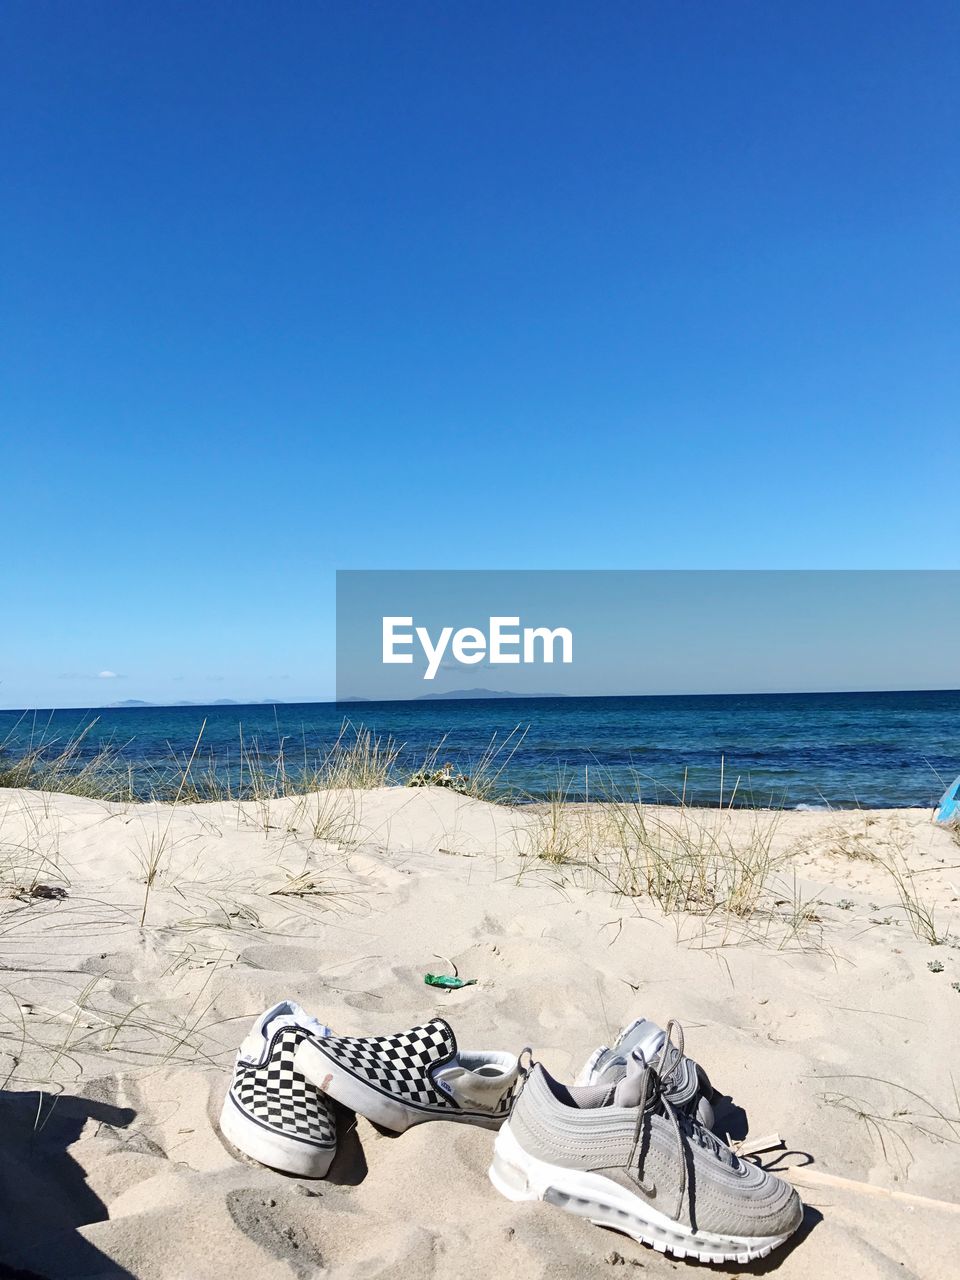 VIEW OF SHOES ON BEACH AGAINST CLEAR BLUE SKY